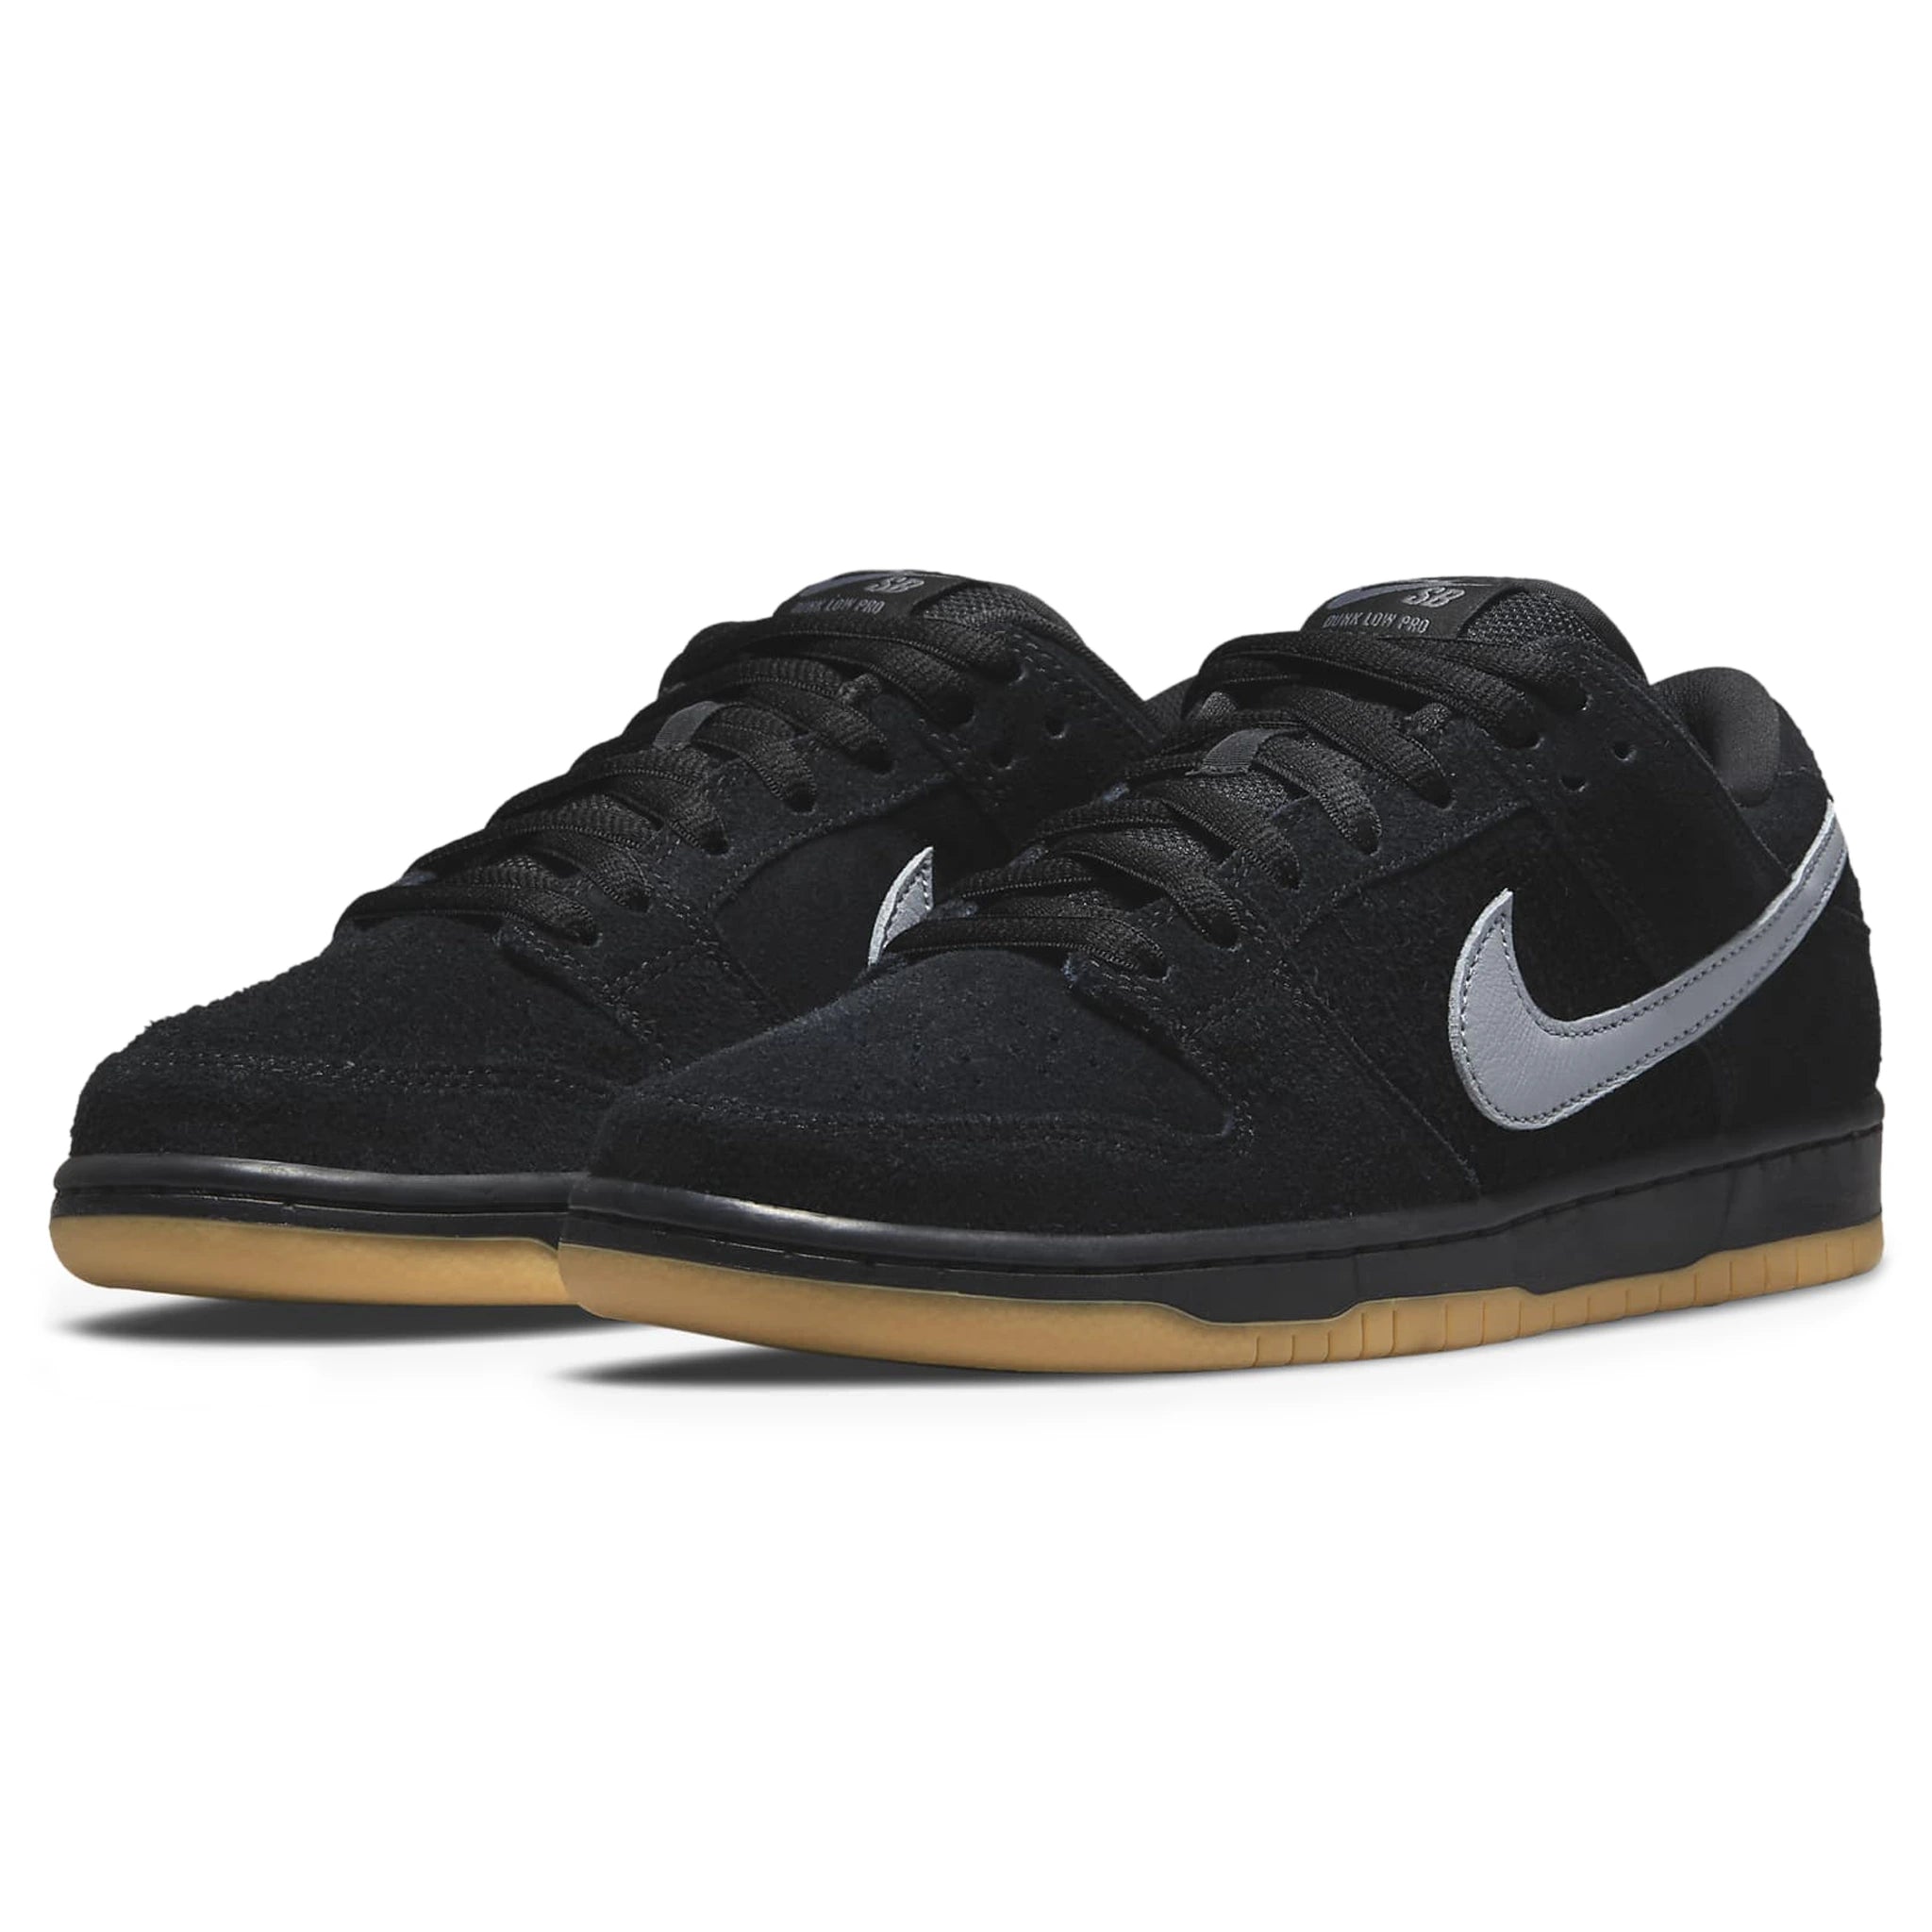 Front side view of Nike SB Dunk Low Pro Fog BQ6817-010